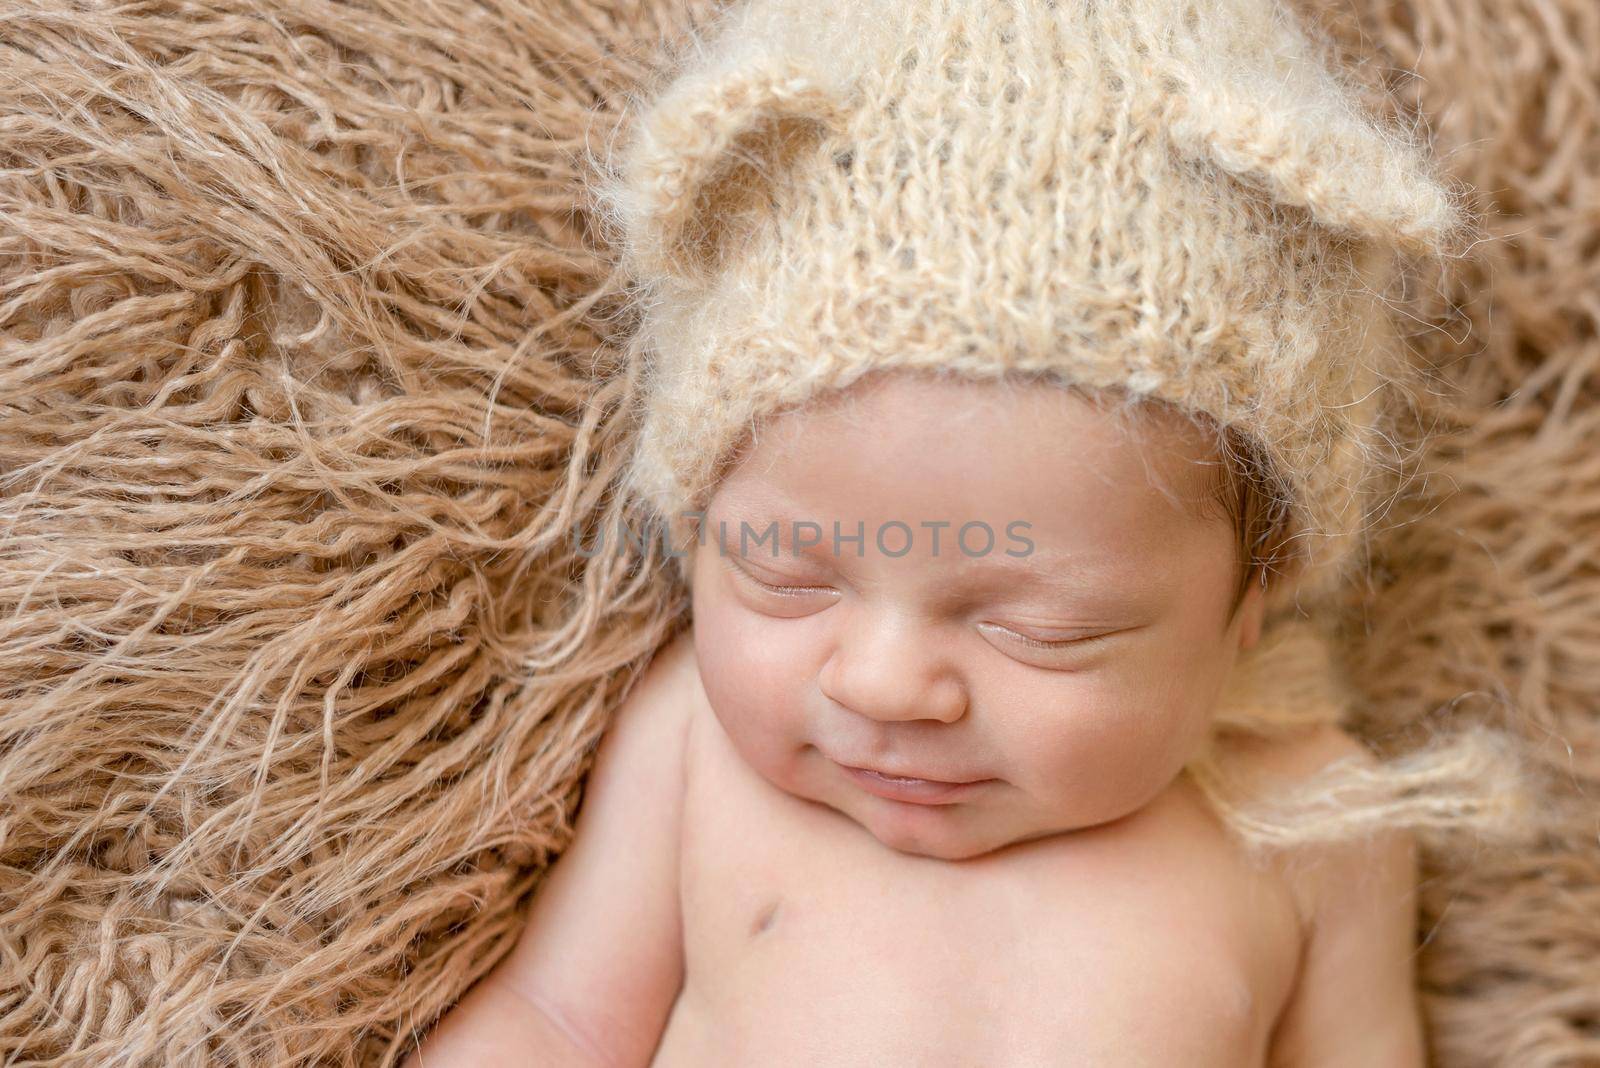 asleep smiling newborn baby in knitted hat on furry blanket, close up